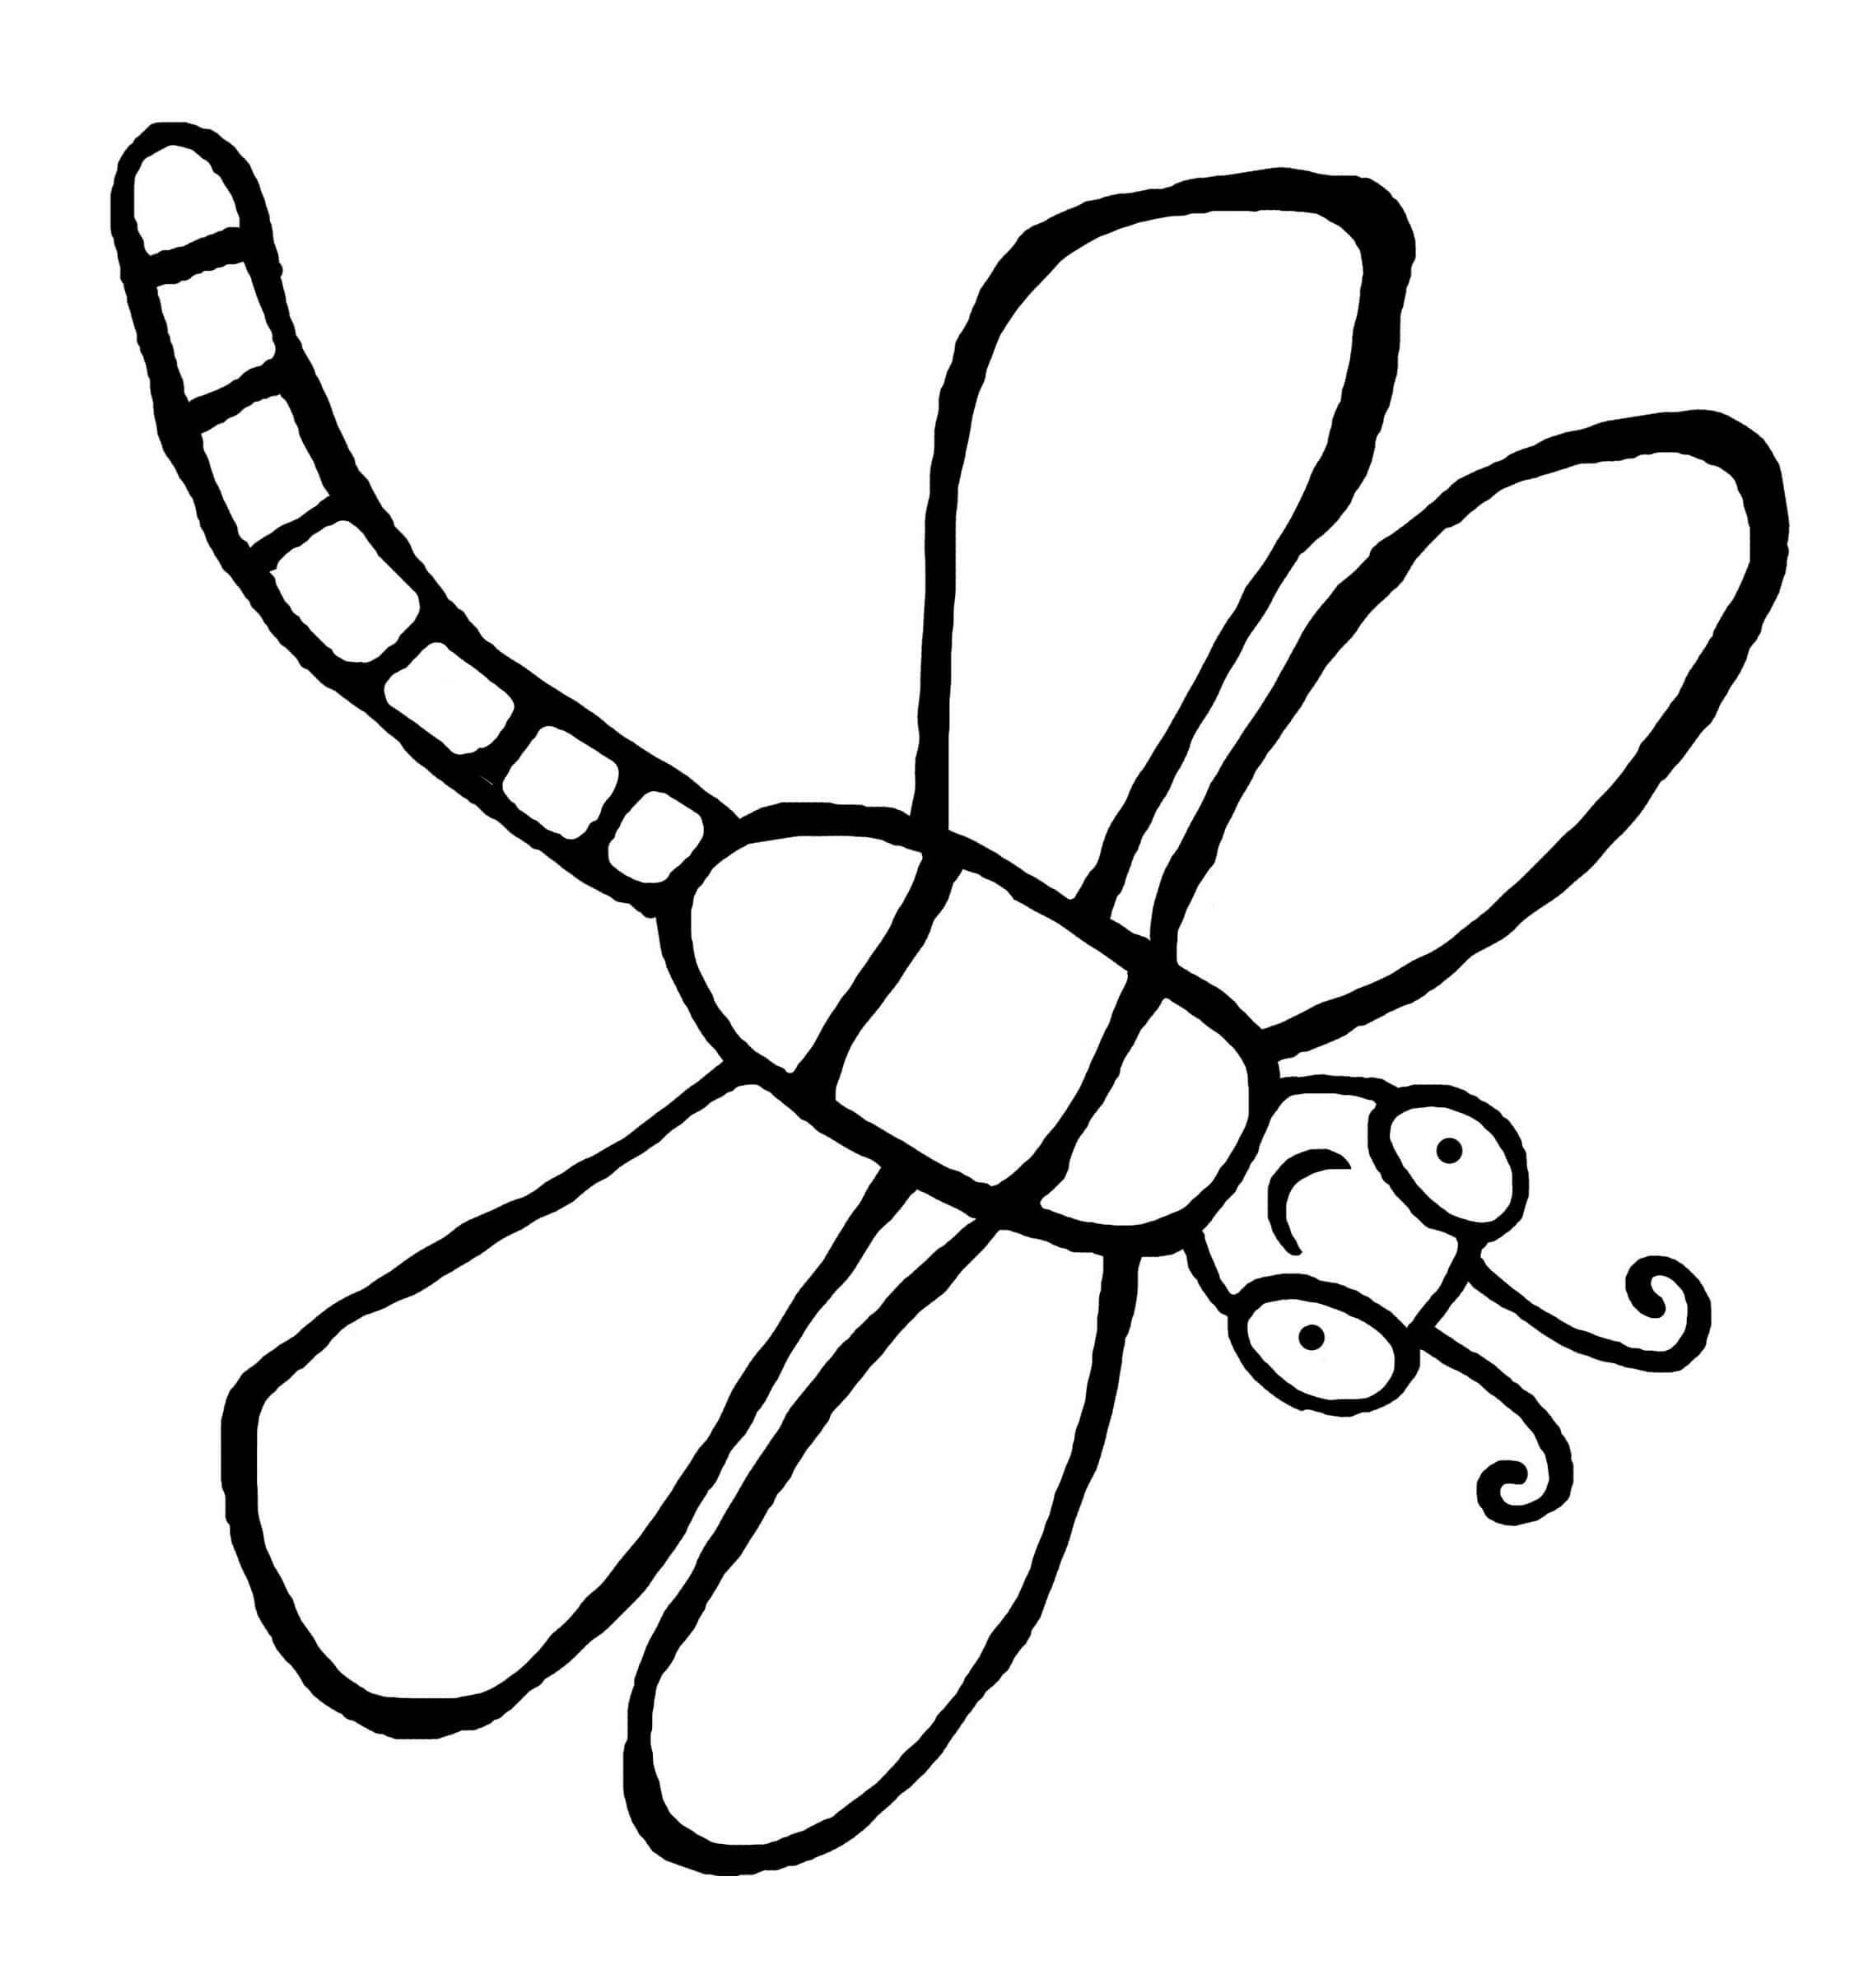 Cute Cartoon Dragonfly Coloring Page